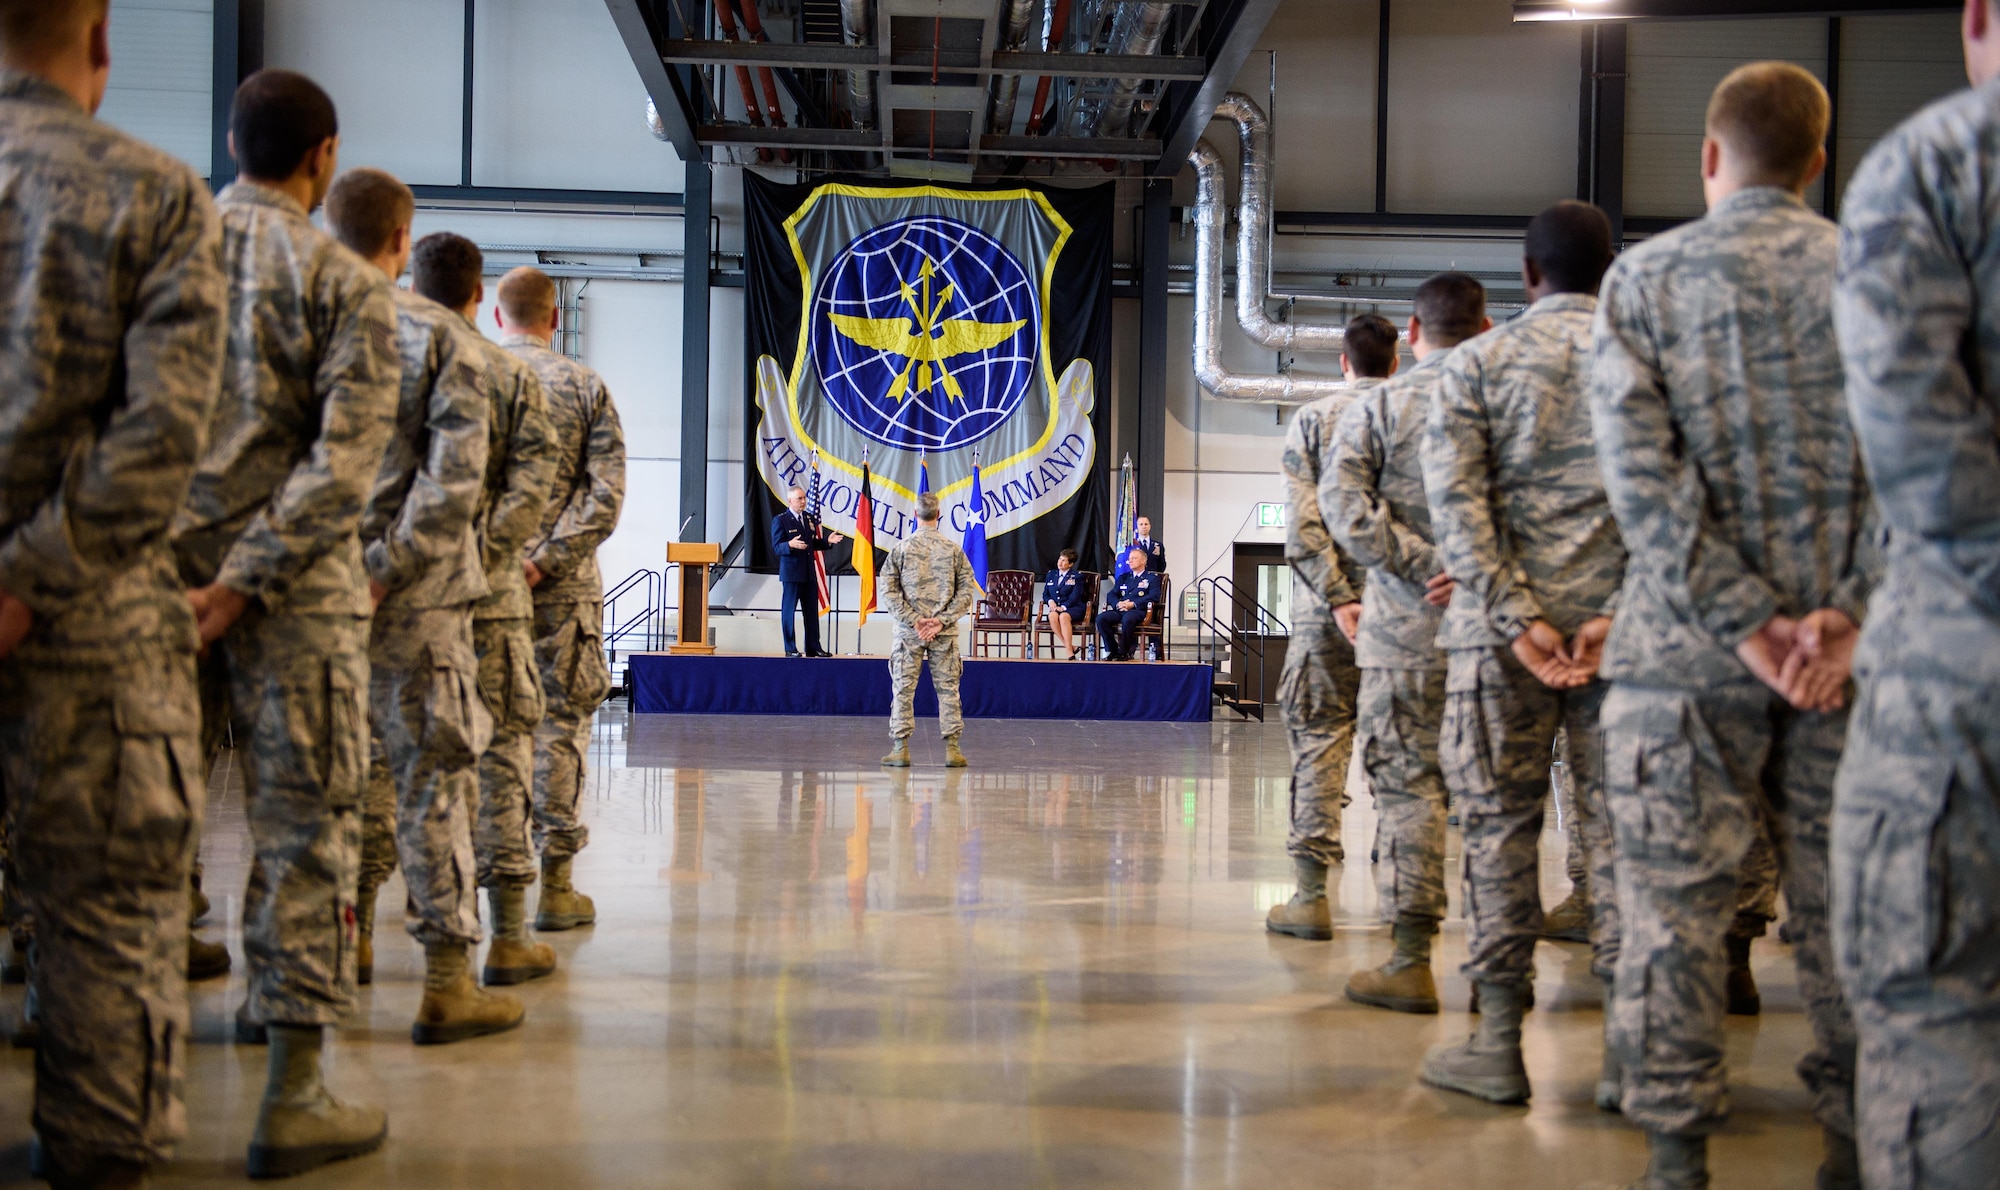 Airmen from the 521st Air Mobility Operations Wing listen to Maj. Gen. Frederick Martin, U.S. Air Force Expeditionary Center commander, at Ramstein Air Base, Germany, June 14, 2016. Martin was the presiding officer during the 521st AMOW change of command with Col. Thomas Cooper as he became the new commander. (U.S. Air Force photo/Staff Sgt. Armando A. Schwier-Morales)